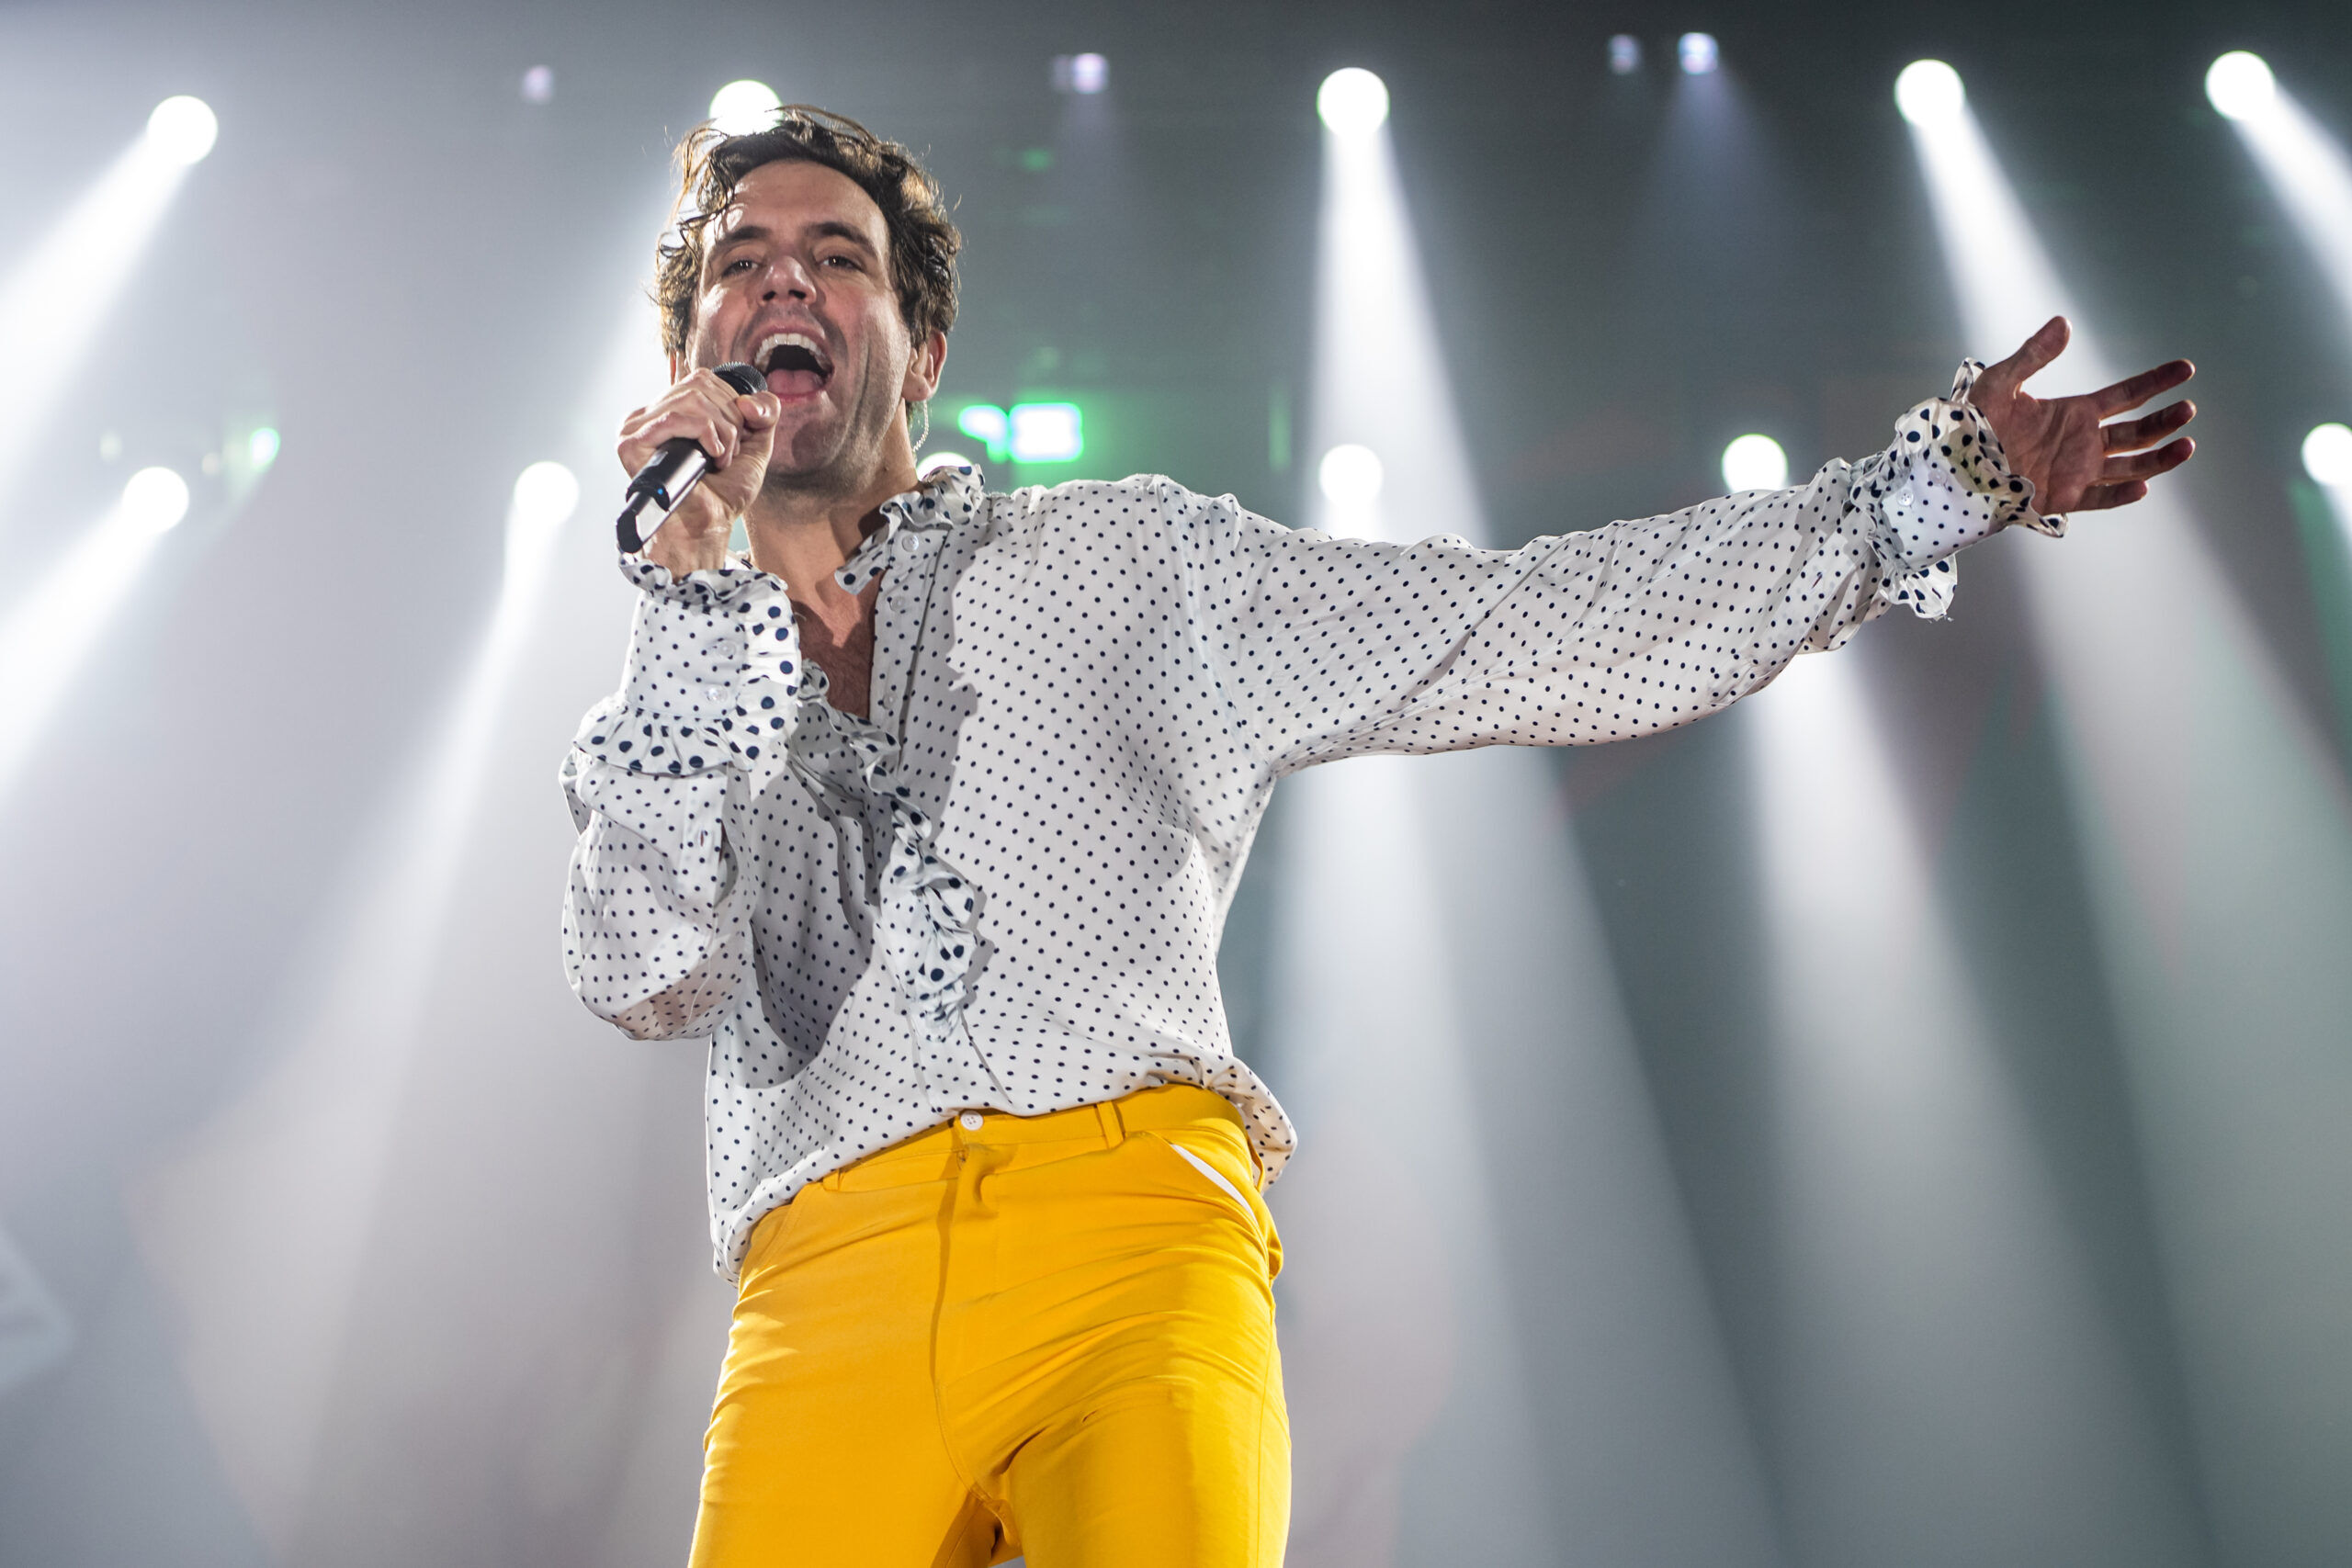 Bari, Italy - February 7, 2020: the English artist and songwriter Mika, performs live for his "Revelation Tour"